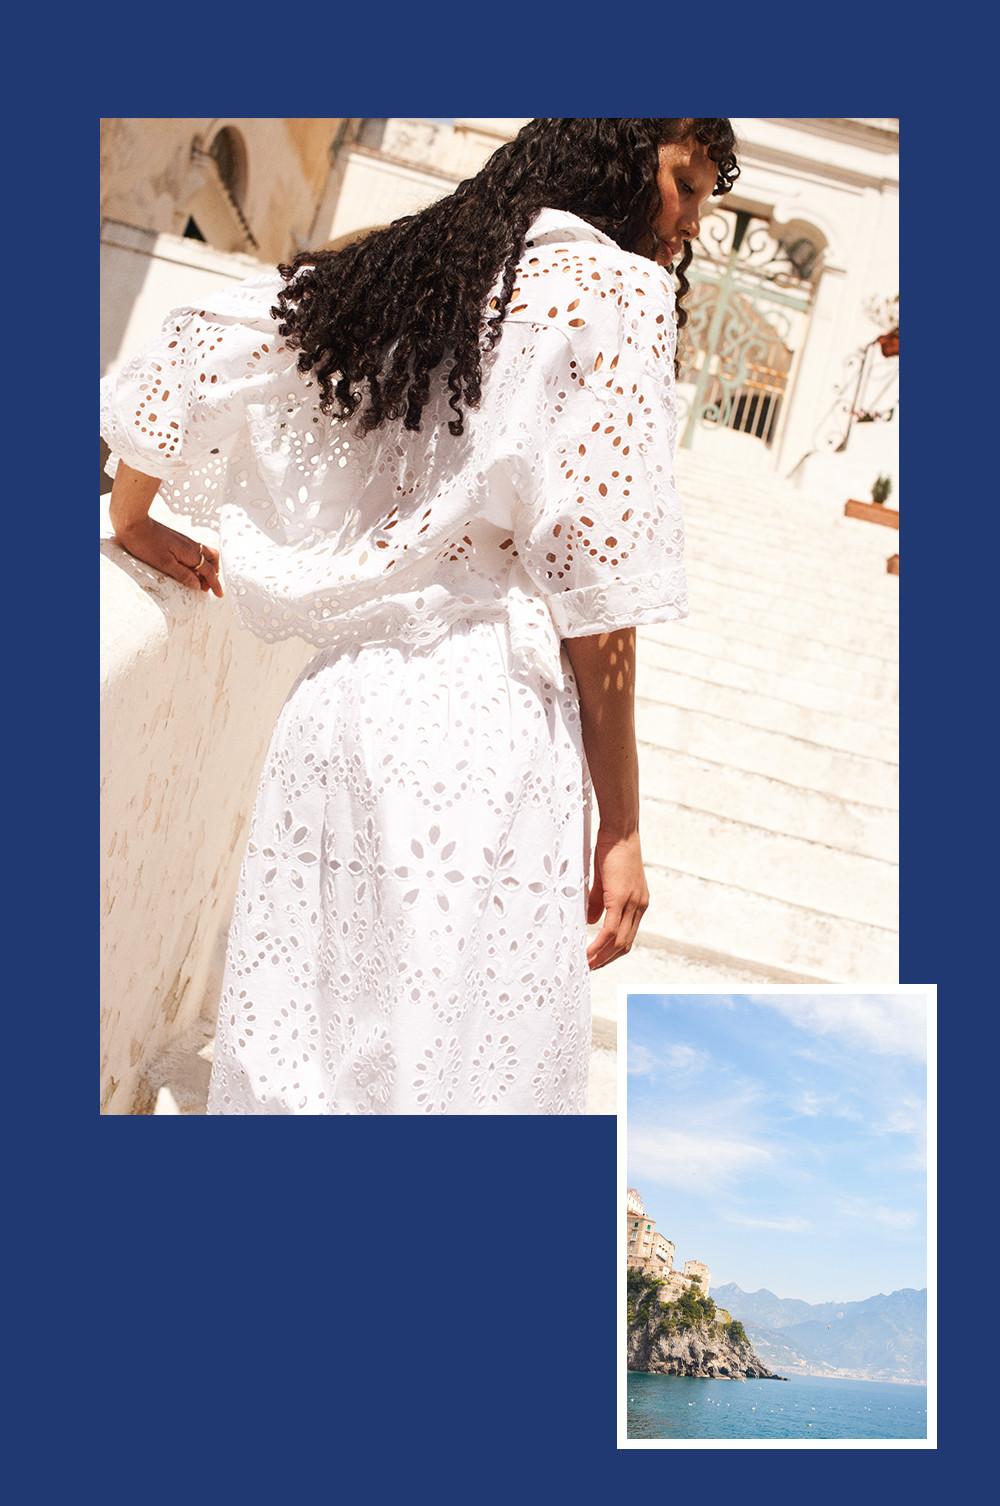 Collage of woman wearing a white broderie top, shirt and skirt and an image of a beach view